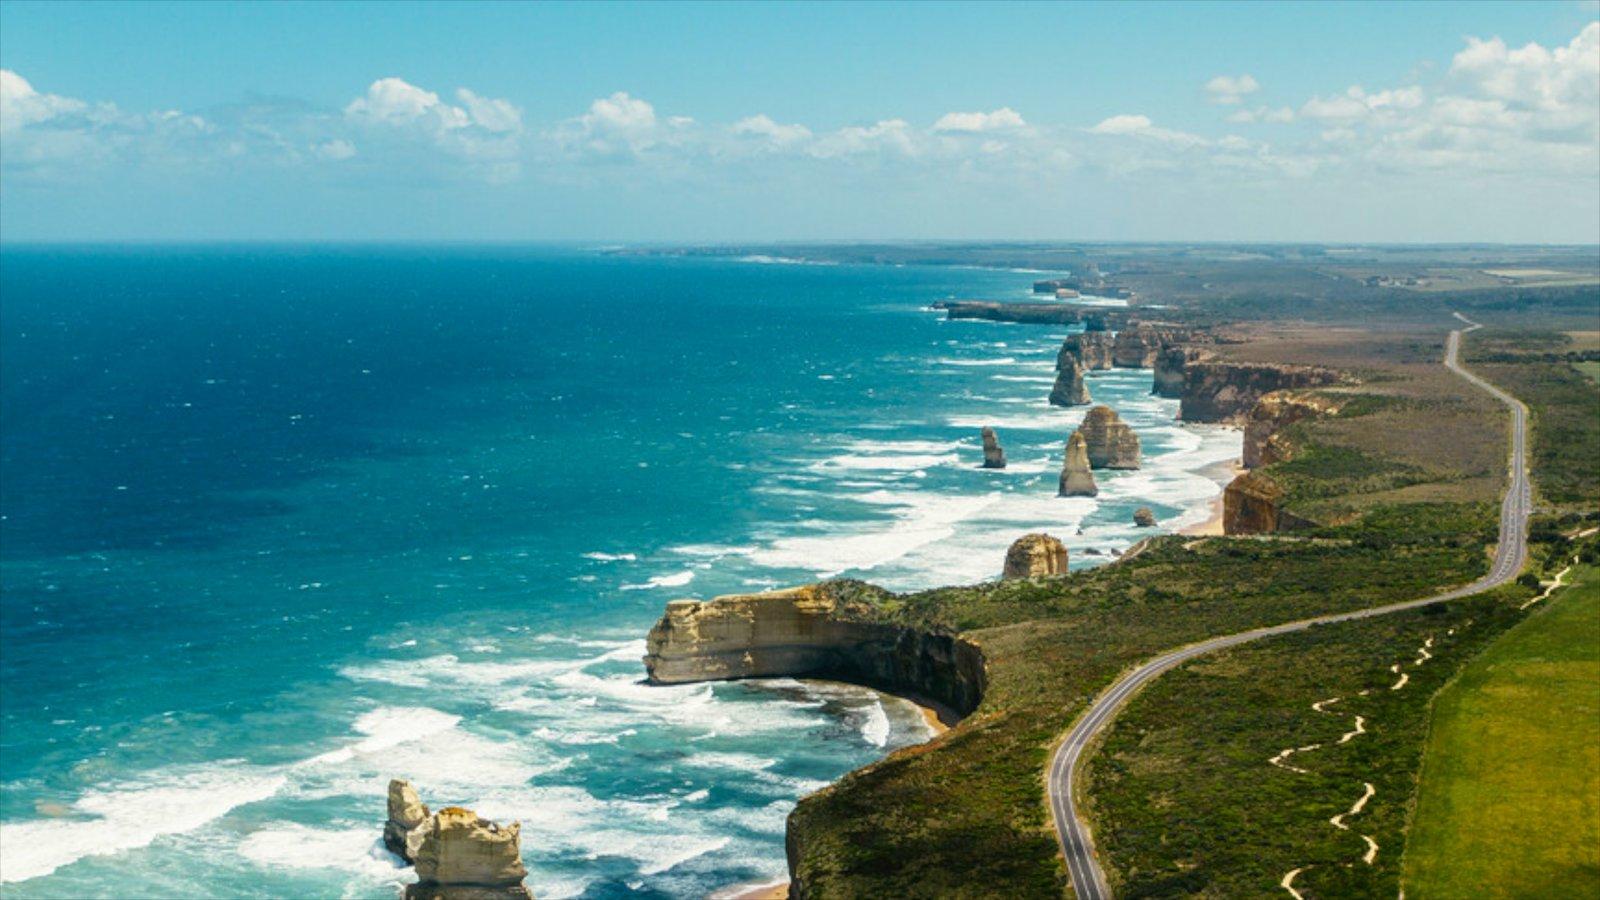 Great Ocean Road picture: View photo and image of Great Ocean Road